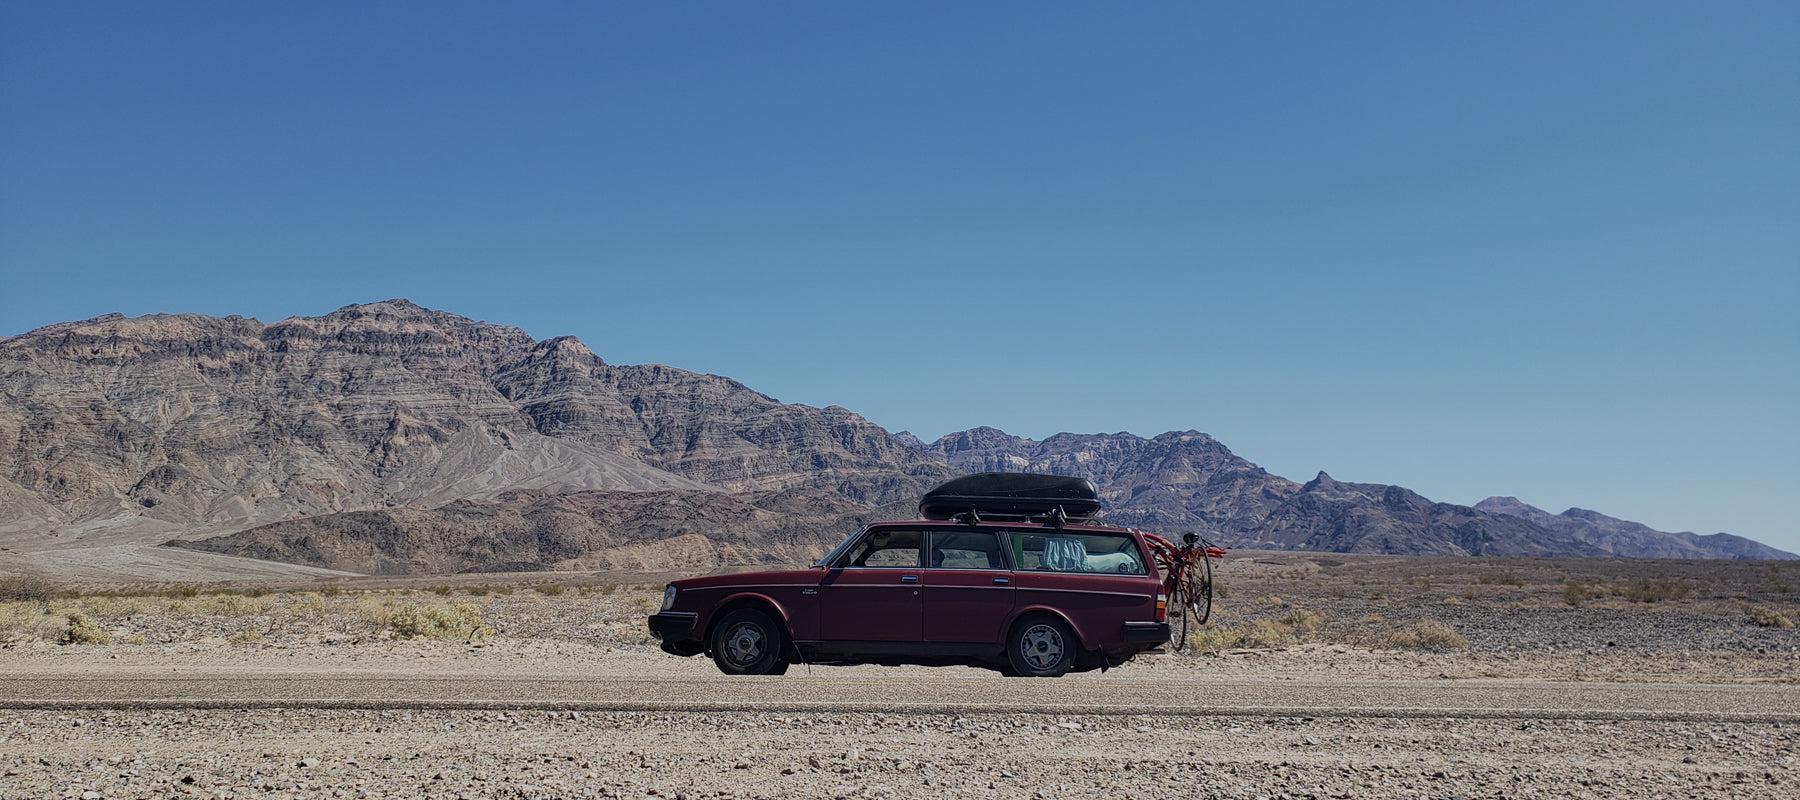 RIGS WE DIG: VOLVO STATION WAGON CAMPING